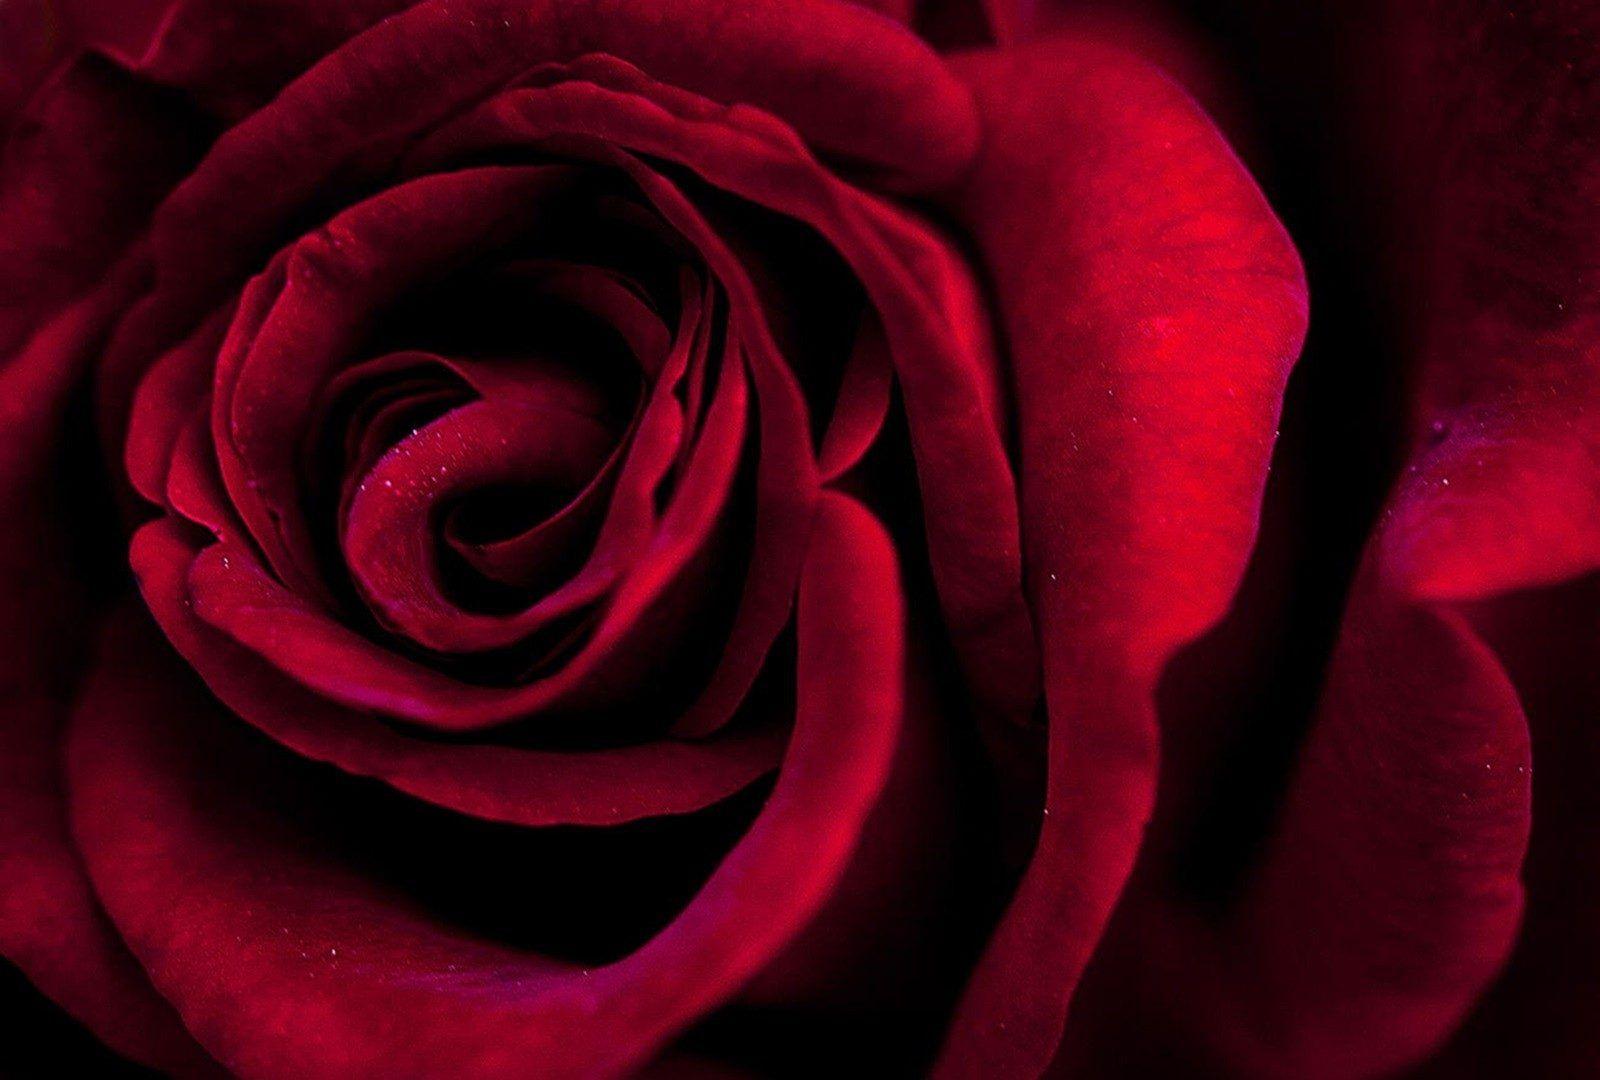 Passion Tag wallpaper: Love Romantic Rose Unconditional Passion Red